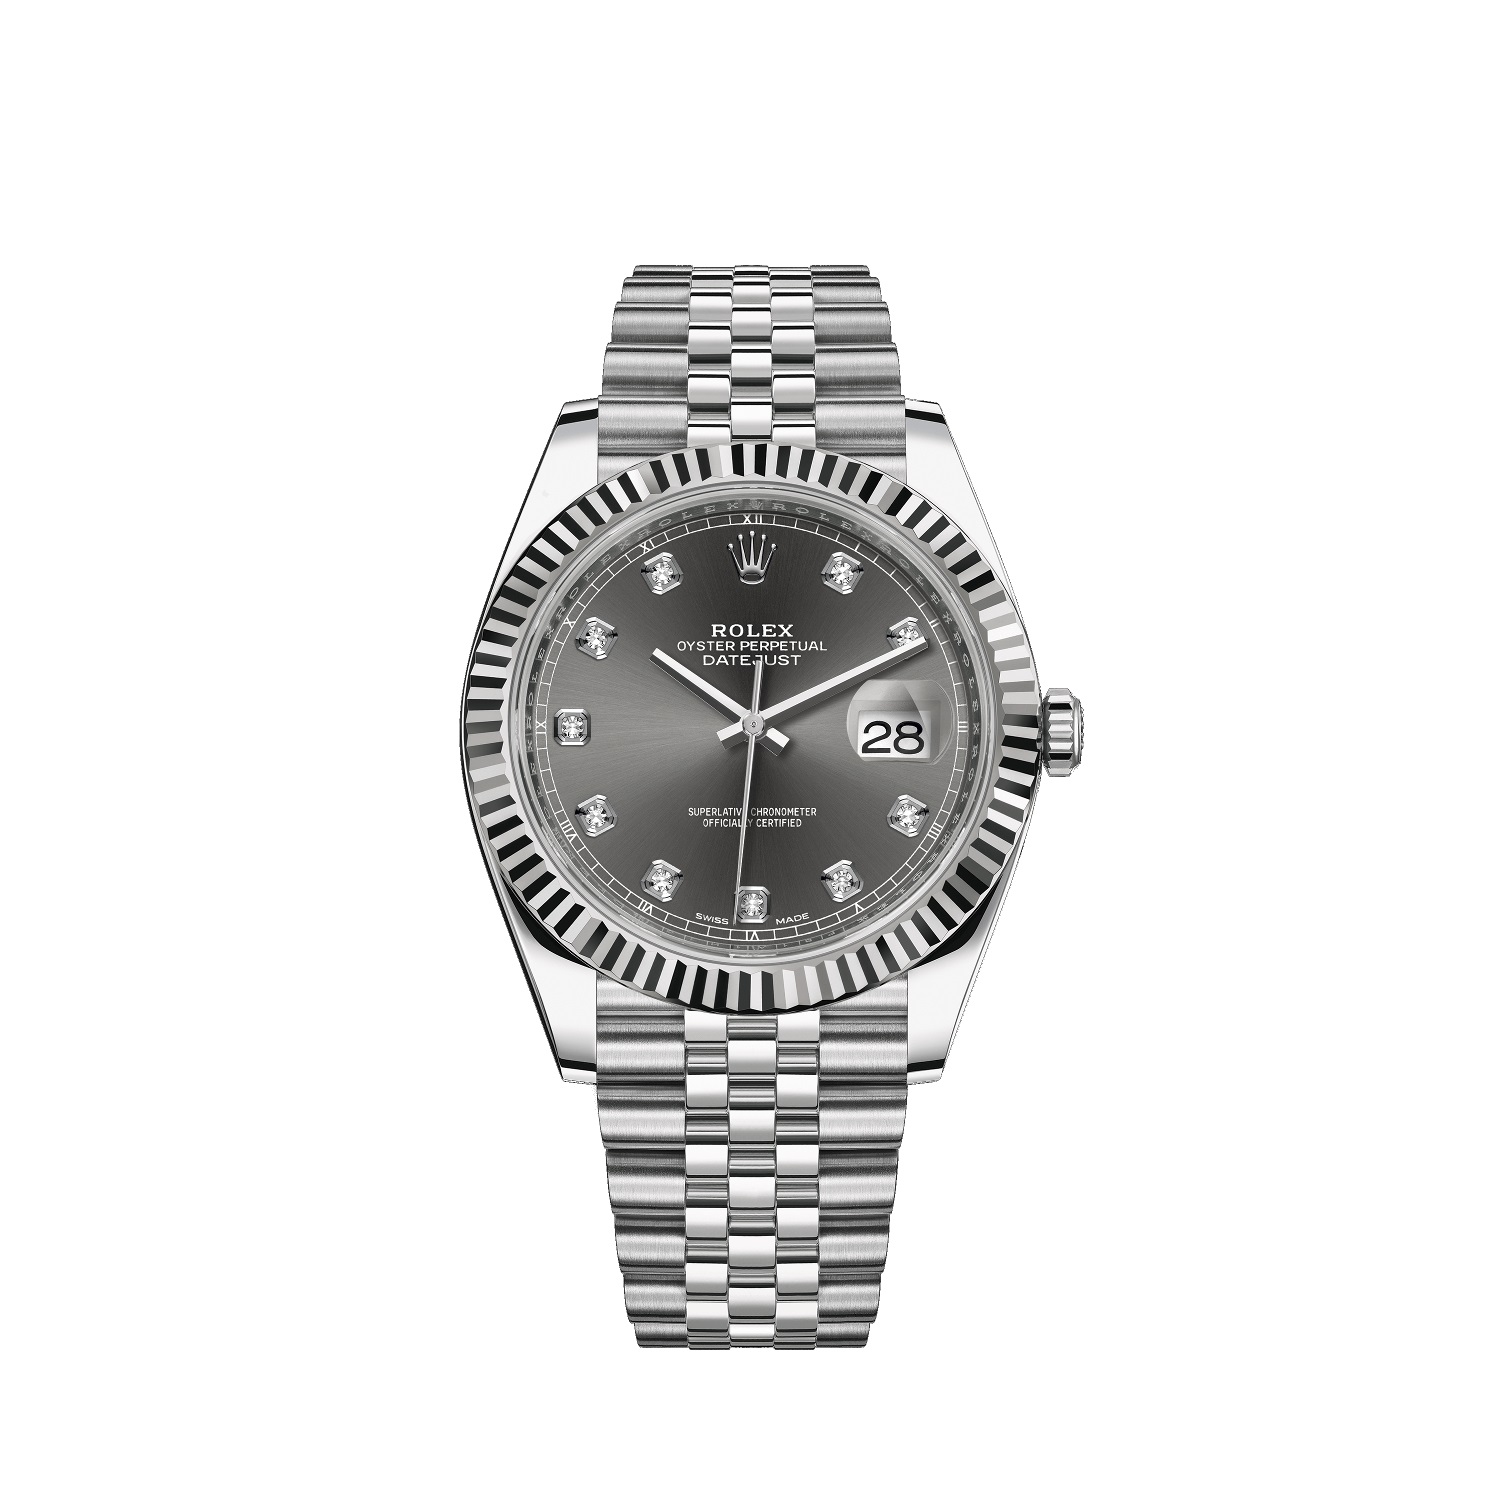 Datejust 41 126334 White Gold & Stainless Steel Watch (Slate Set with Diamonds)